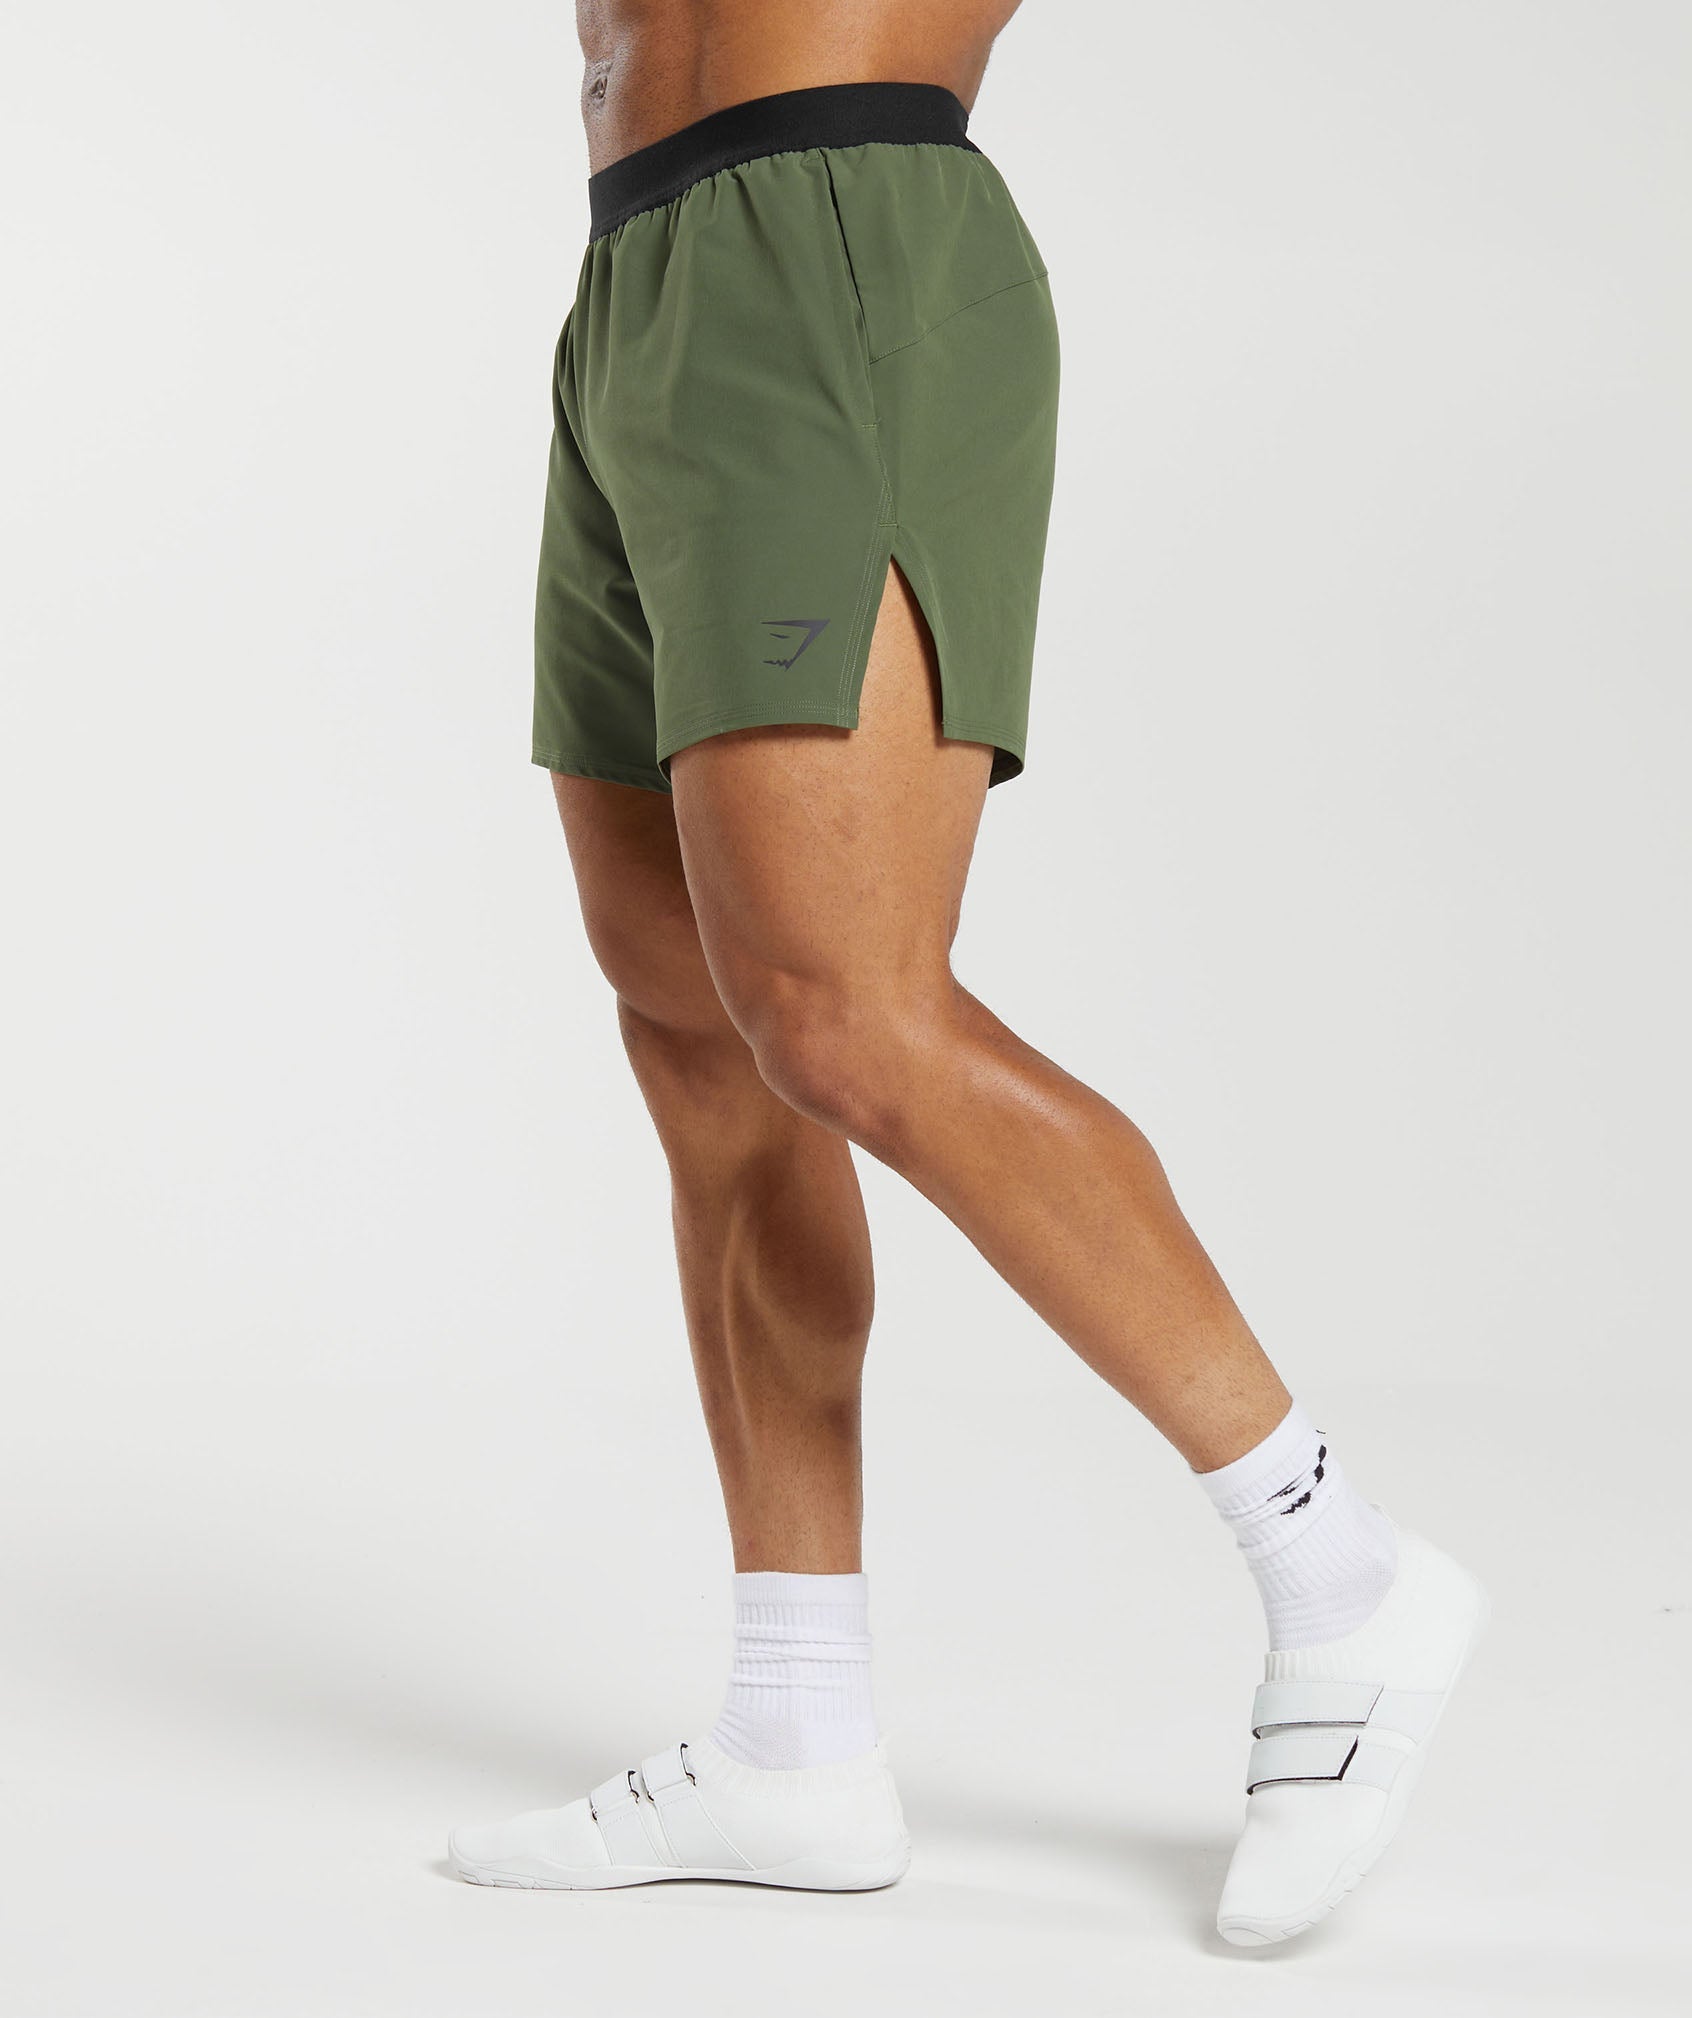 315 Woven Short in Core Olive - view 3